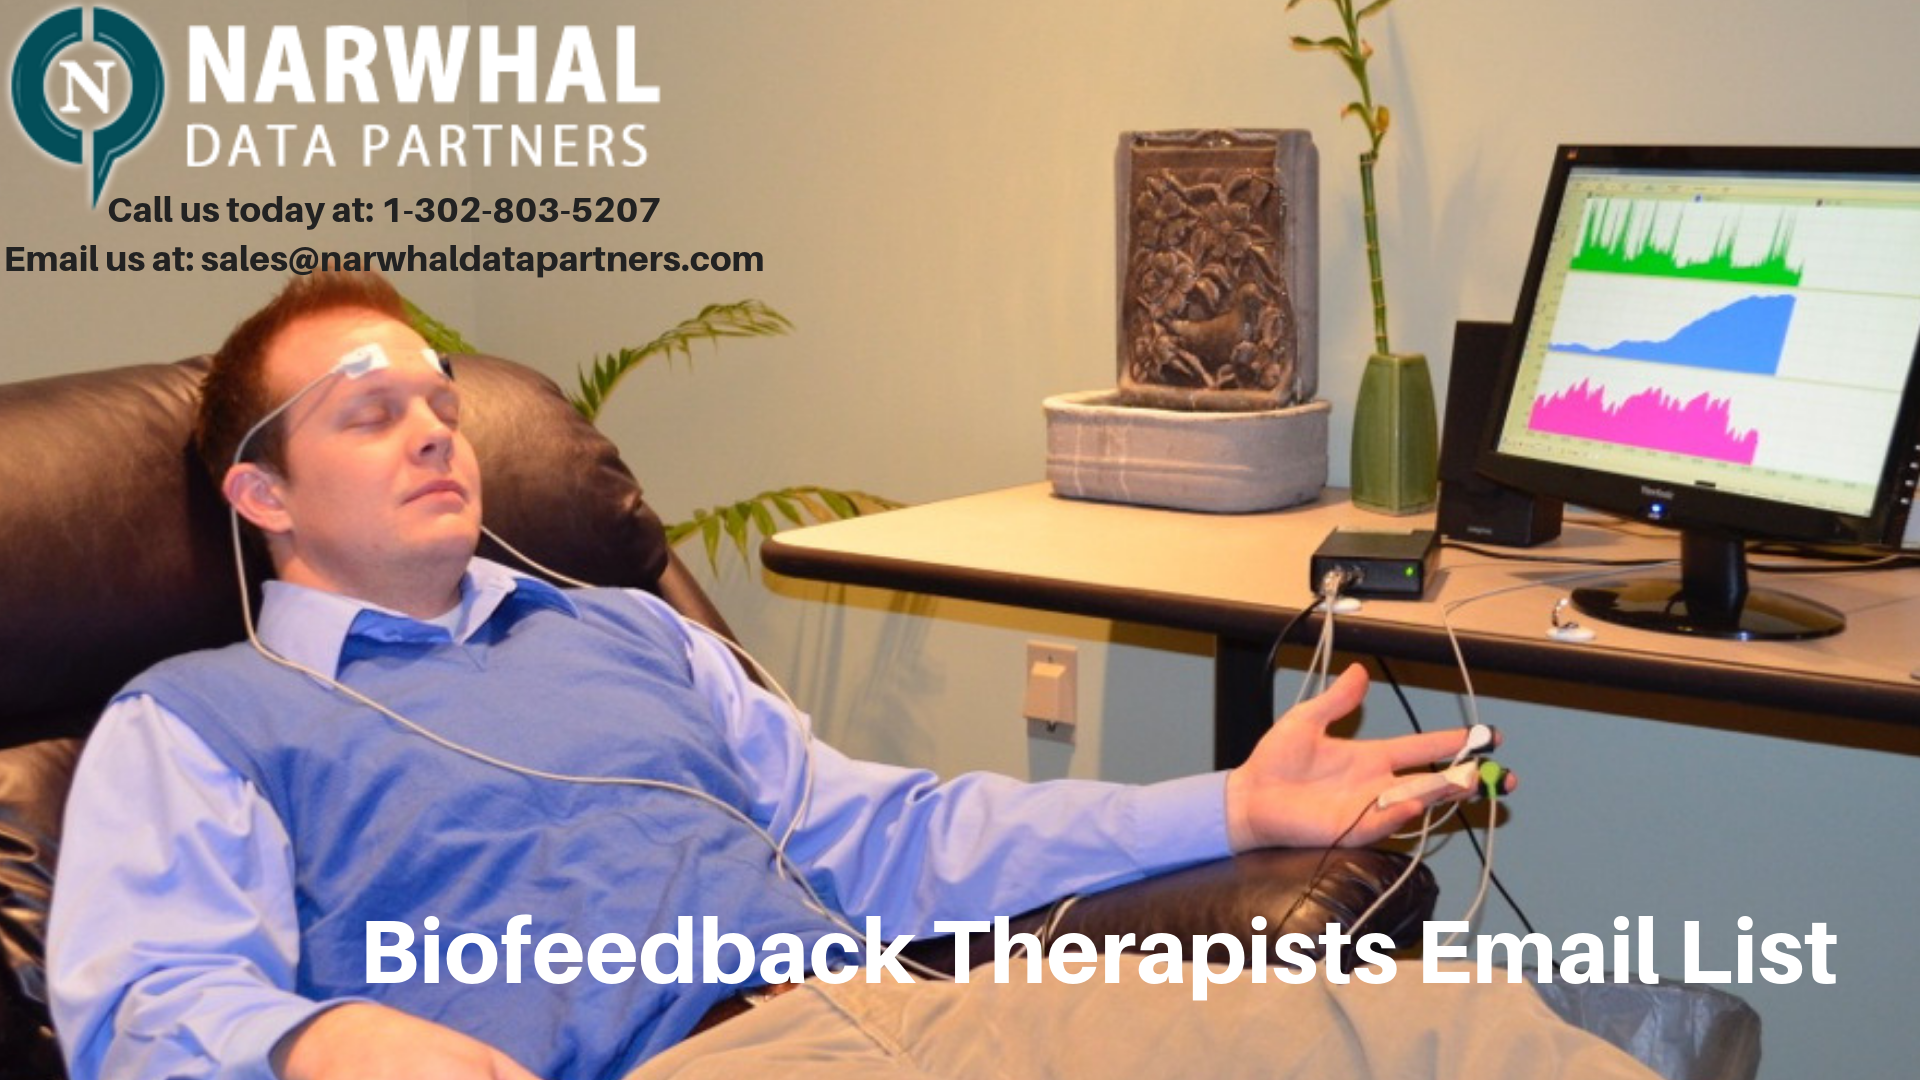 http://narwhaldatapartners.com/biofeedback-therapists-email-list.html